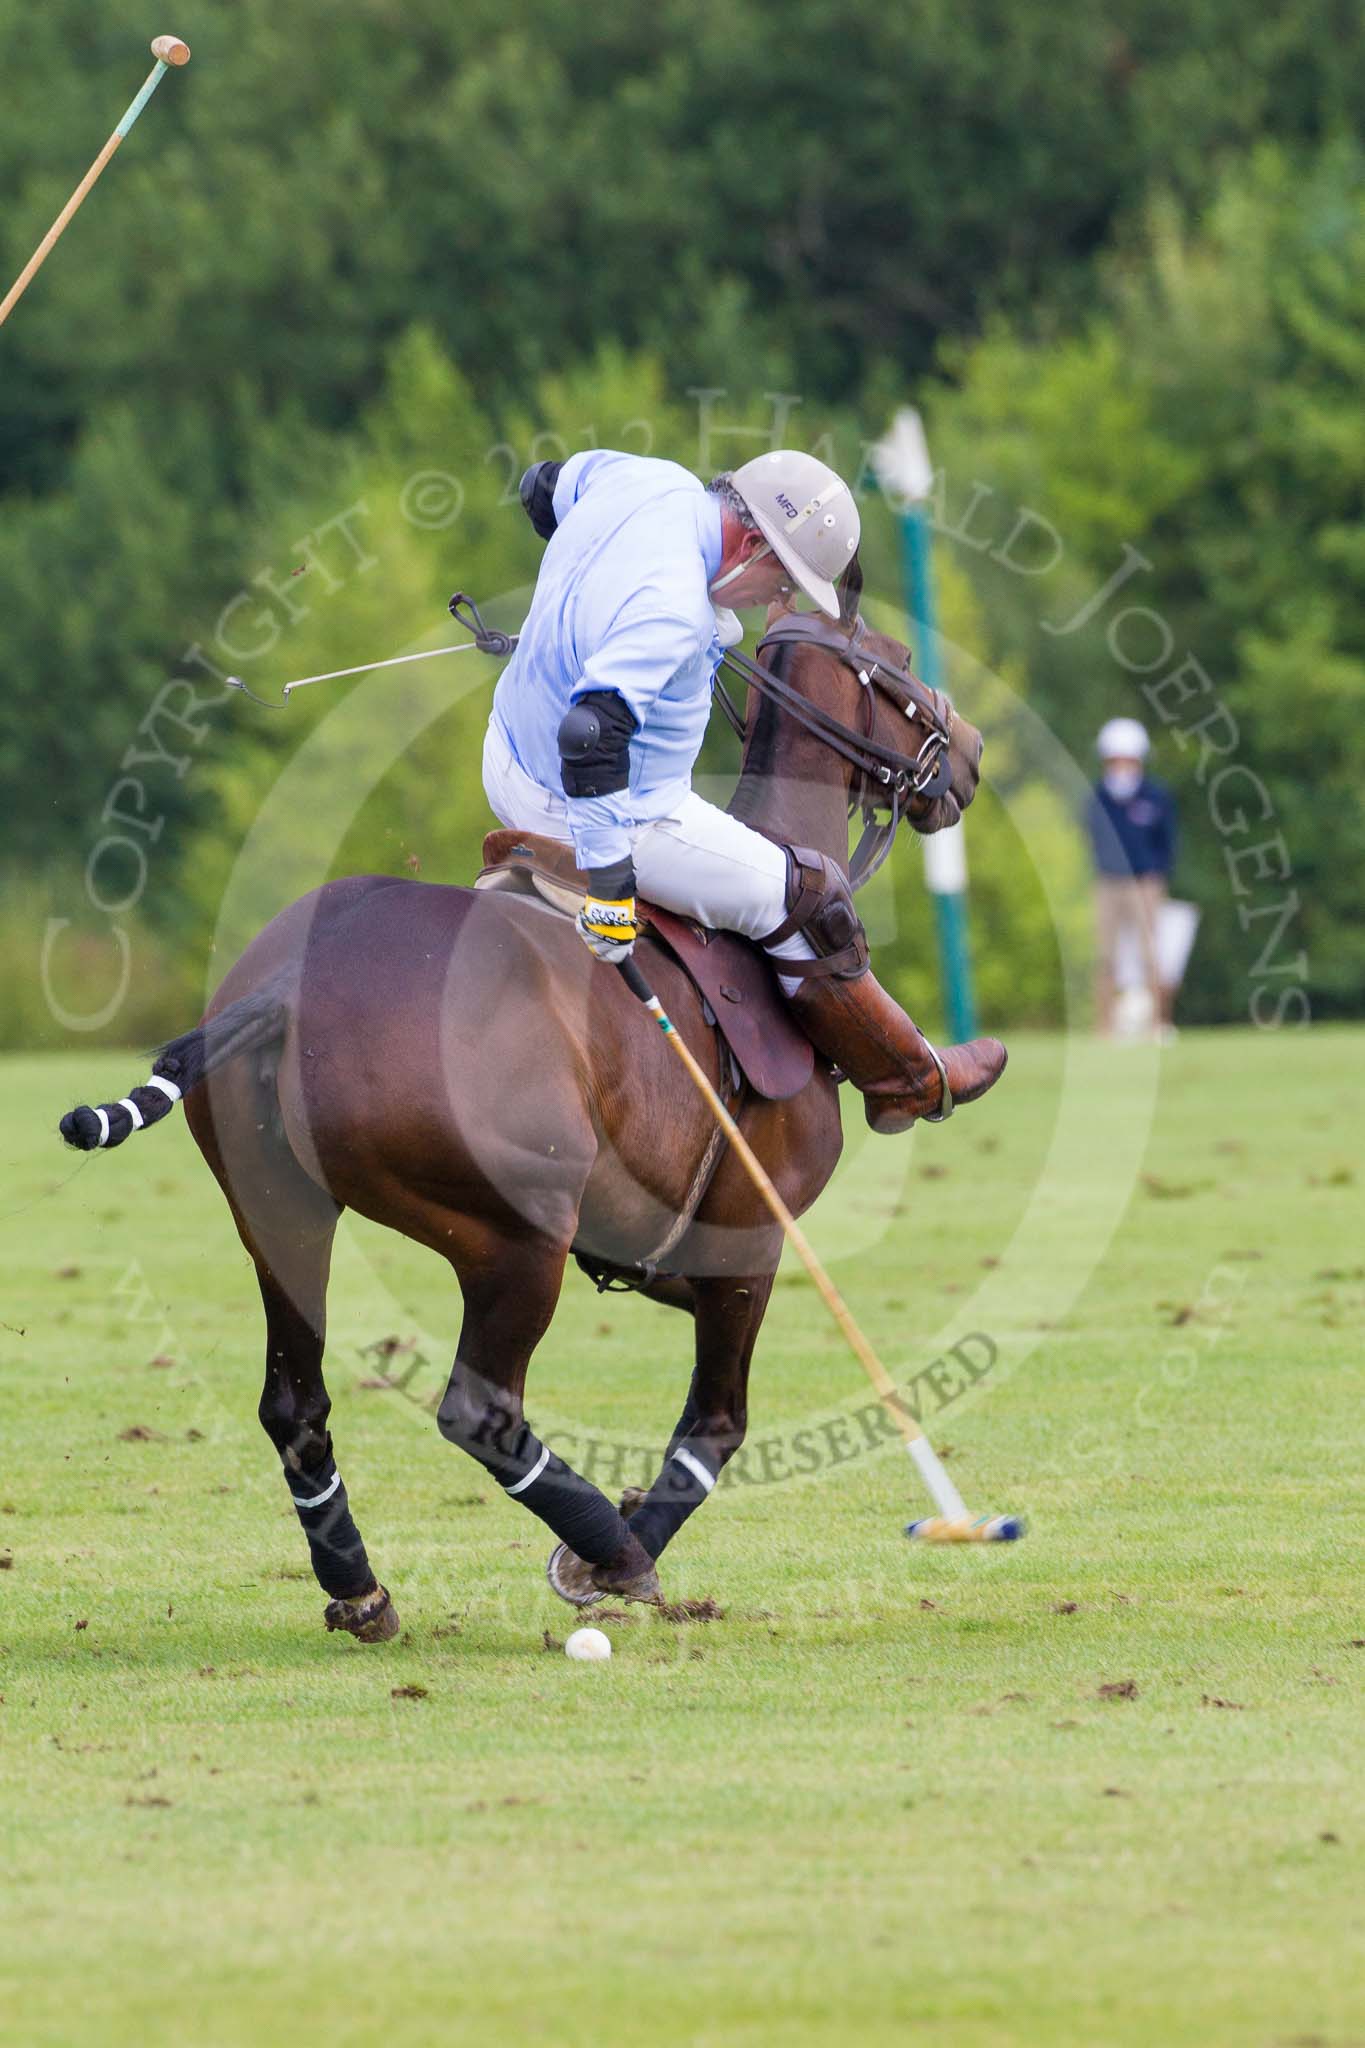 7th Heritage Polo Cup semi-finals: Mariano Darritchon stopping on the ball..
Hurtwood Park Polo Club,
Ewhurst Green,
Surrey,
United Kingdom,
on 04 August 2012 at 15:55, image #300